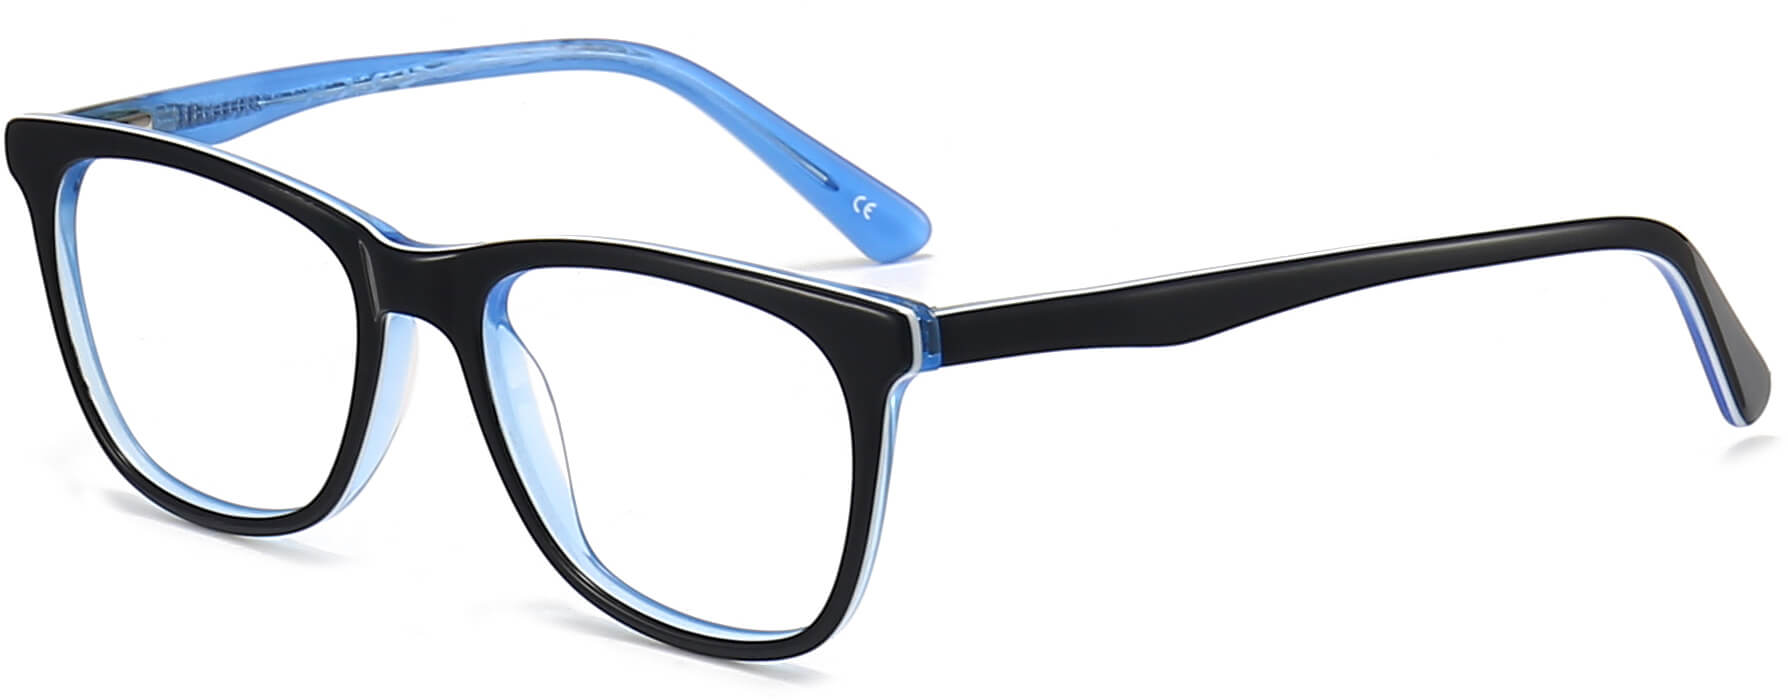 Dave Round Black Eyeglasses from ANRRI, angle view